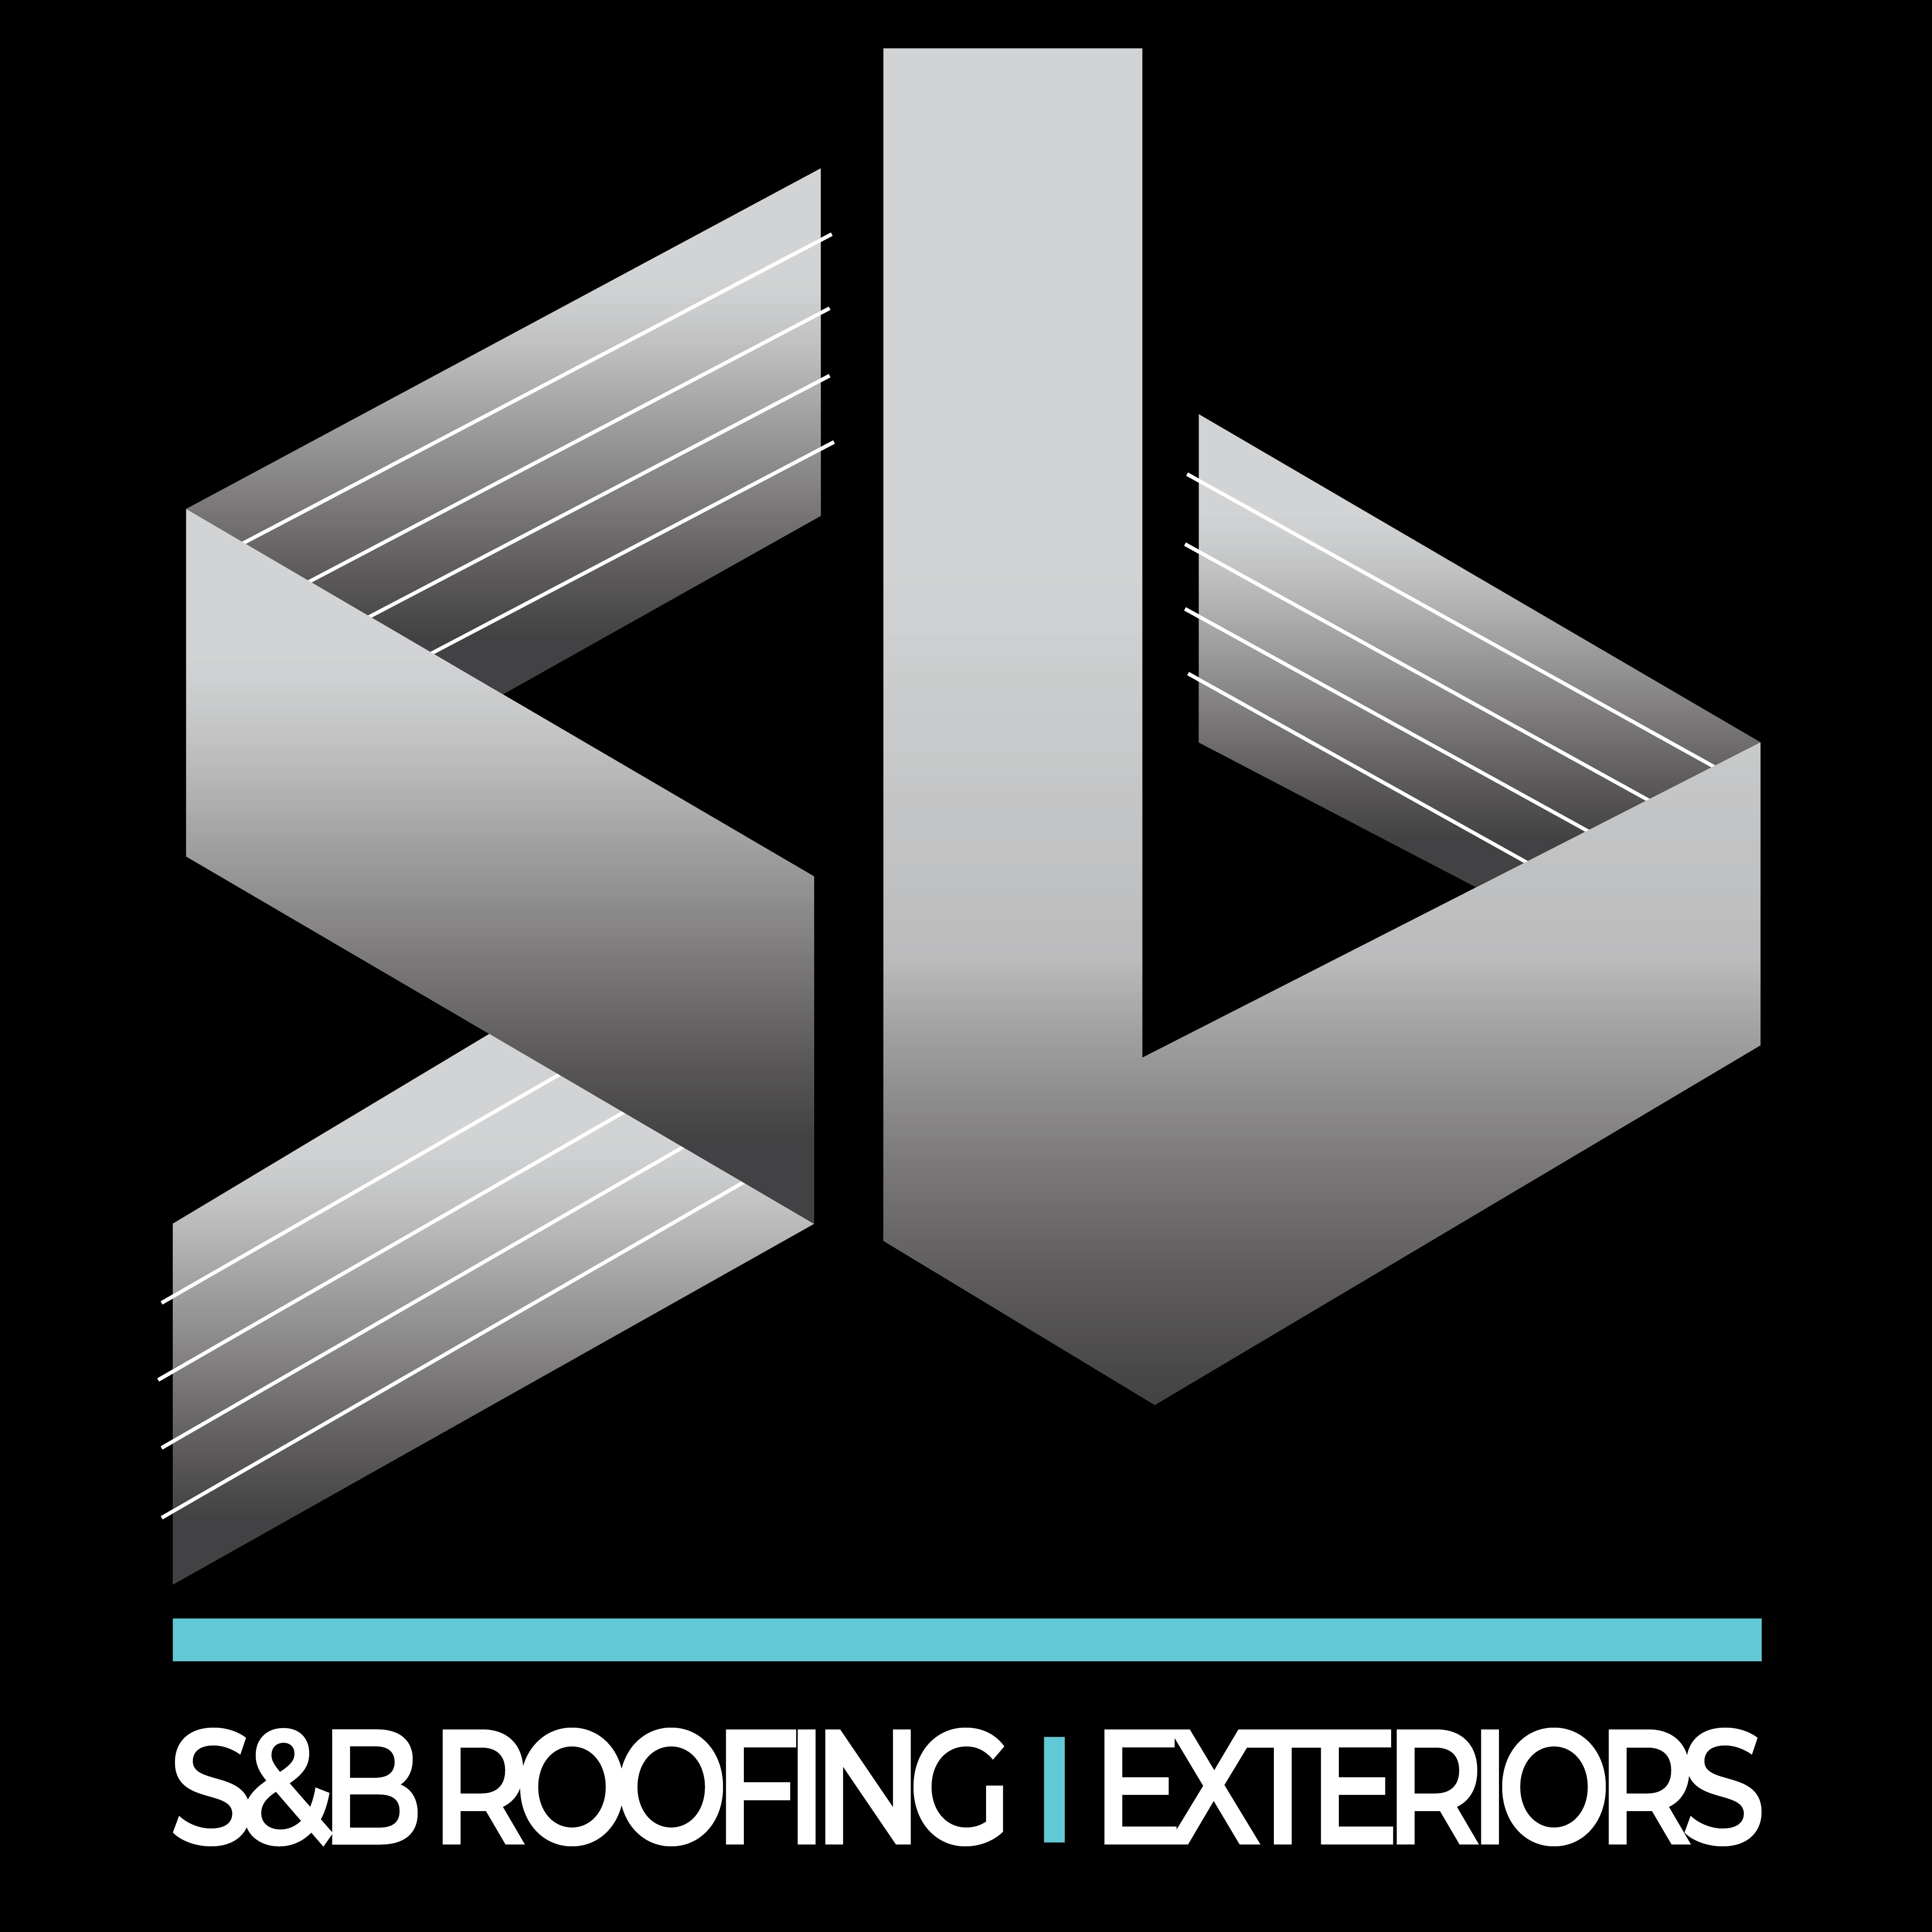 S&B Roofing Company